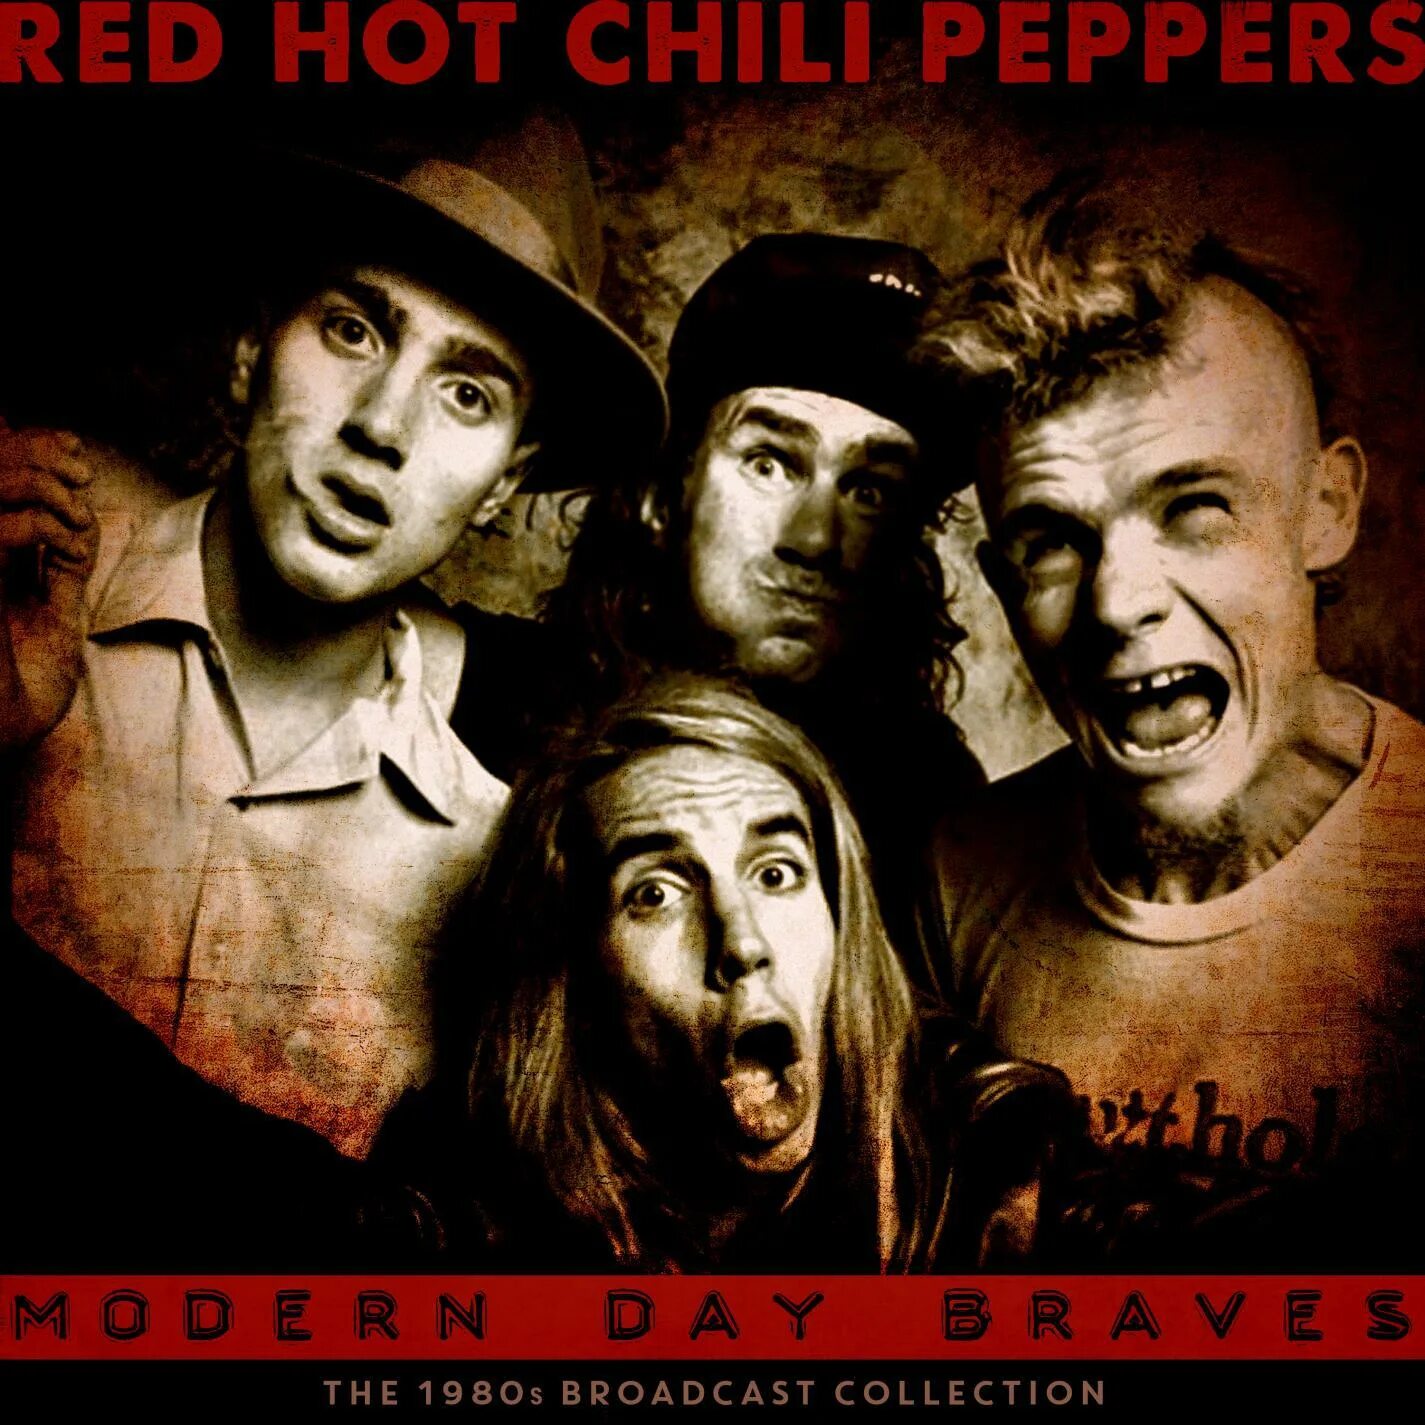 Red hot peppers клипы. RHCP 1988. RHCP 1989. Red hot Chili Peppers. Ред хот Чили Пепперс.